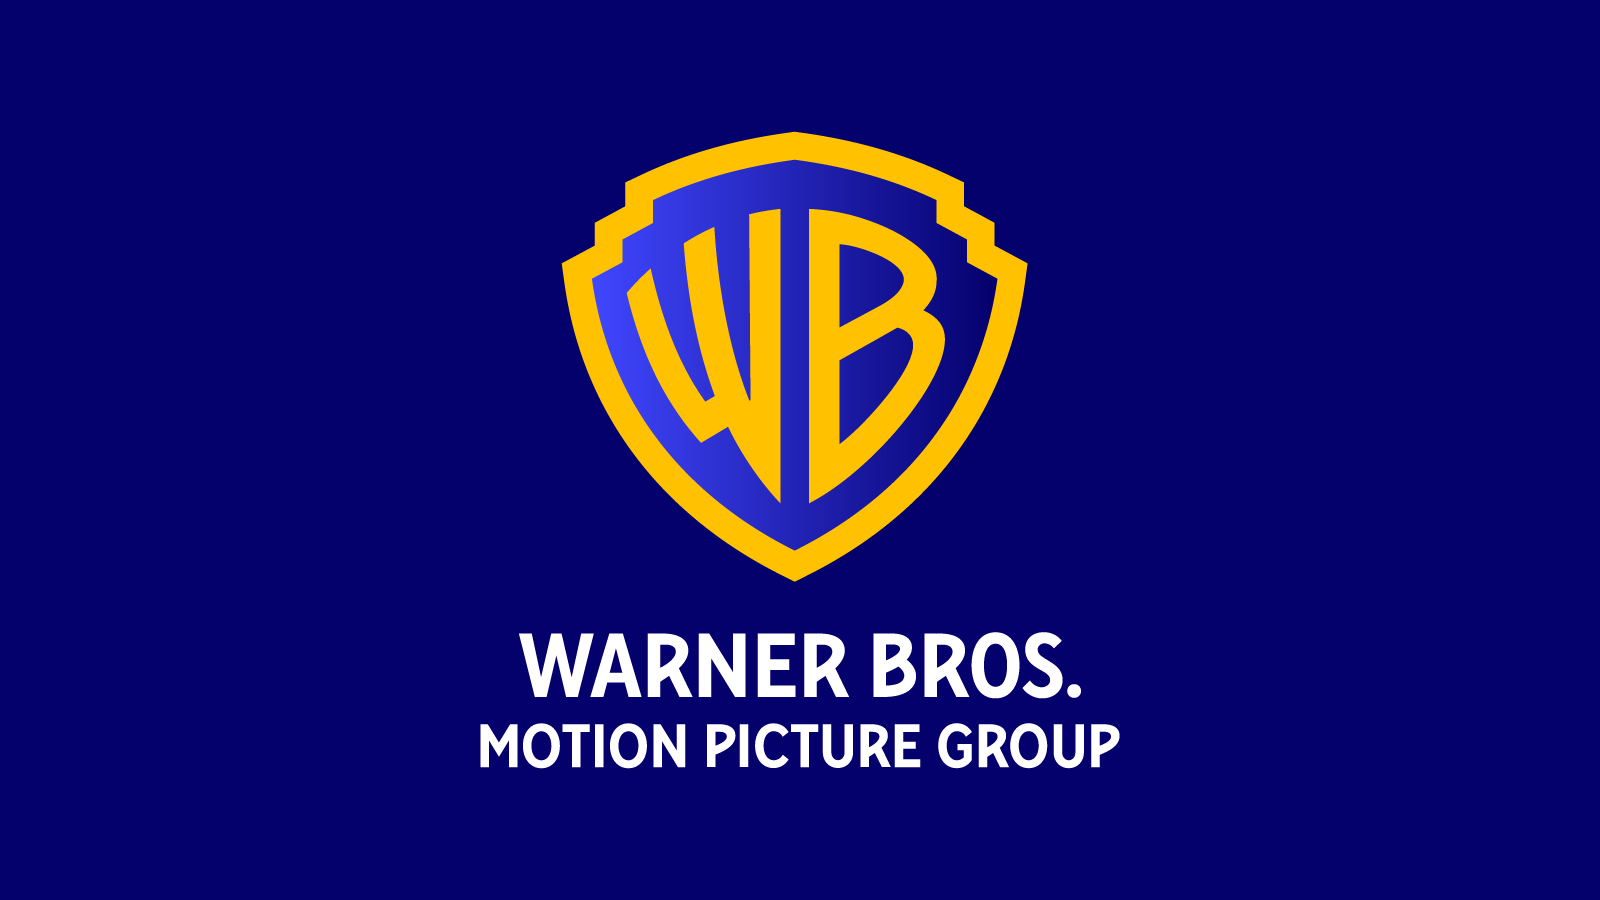 Wb Motion Pictures Group 16x9 1 